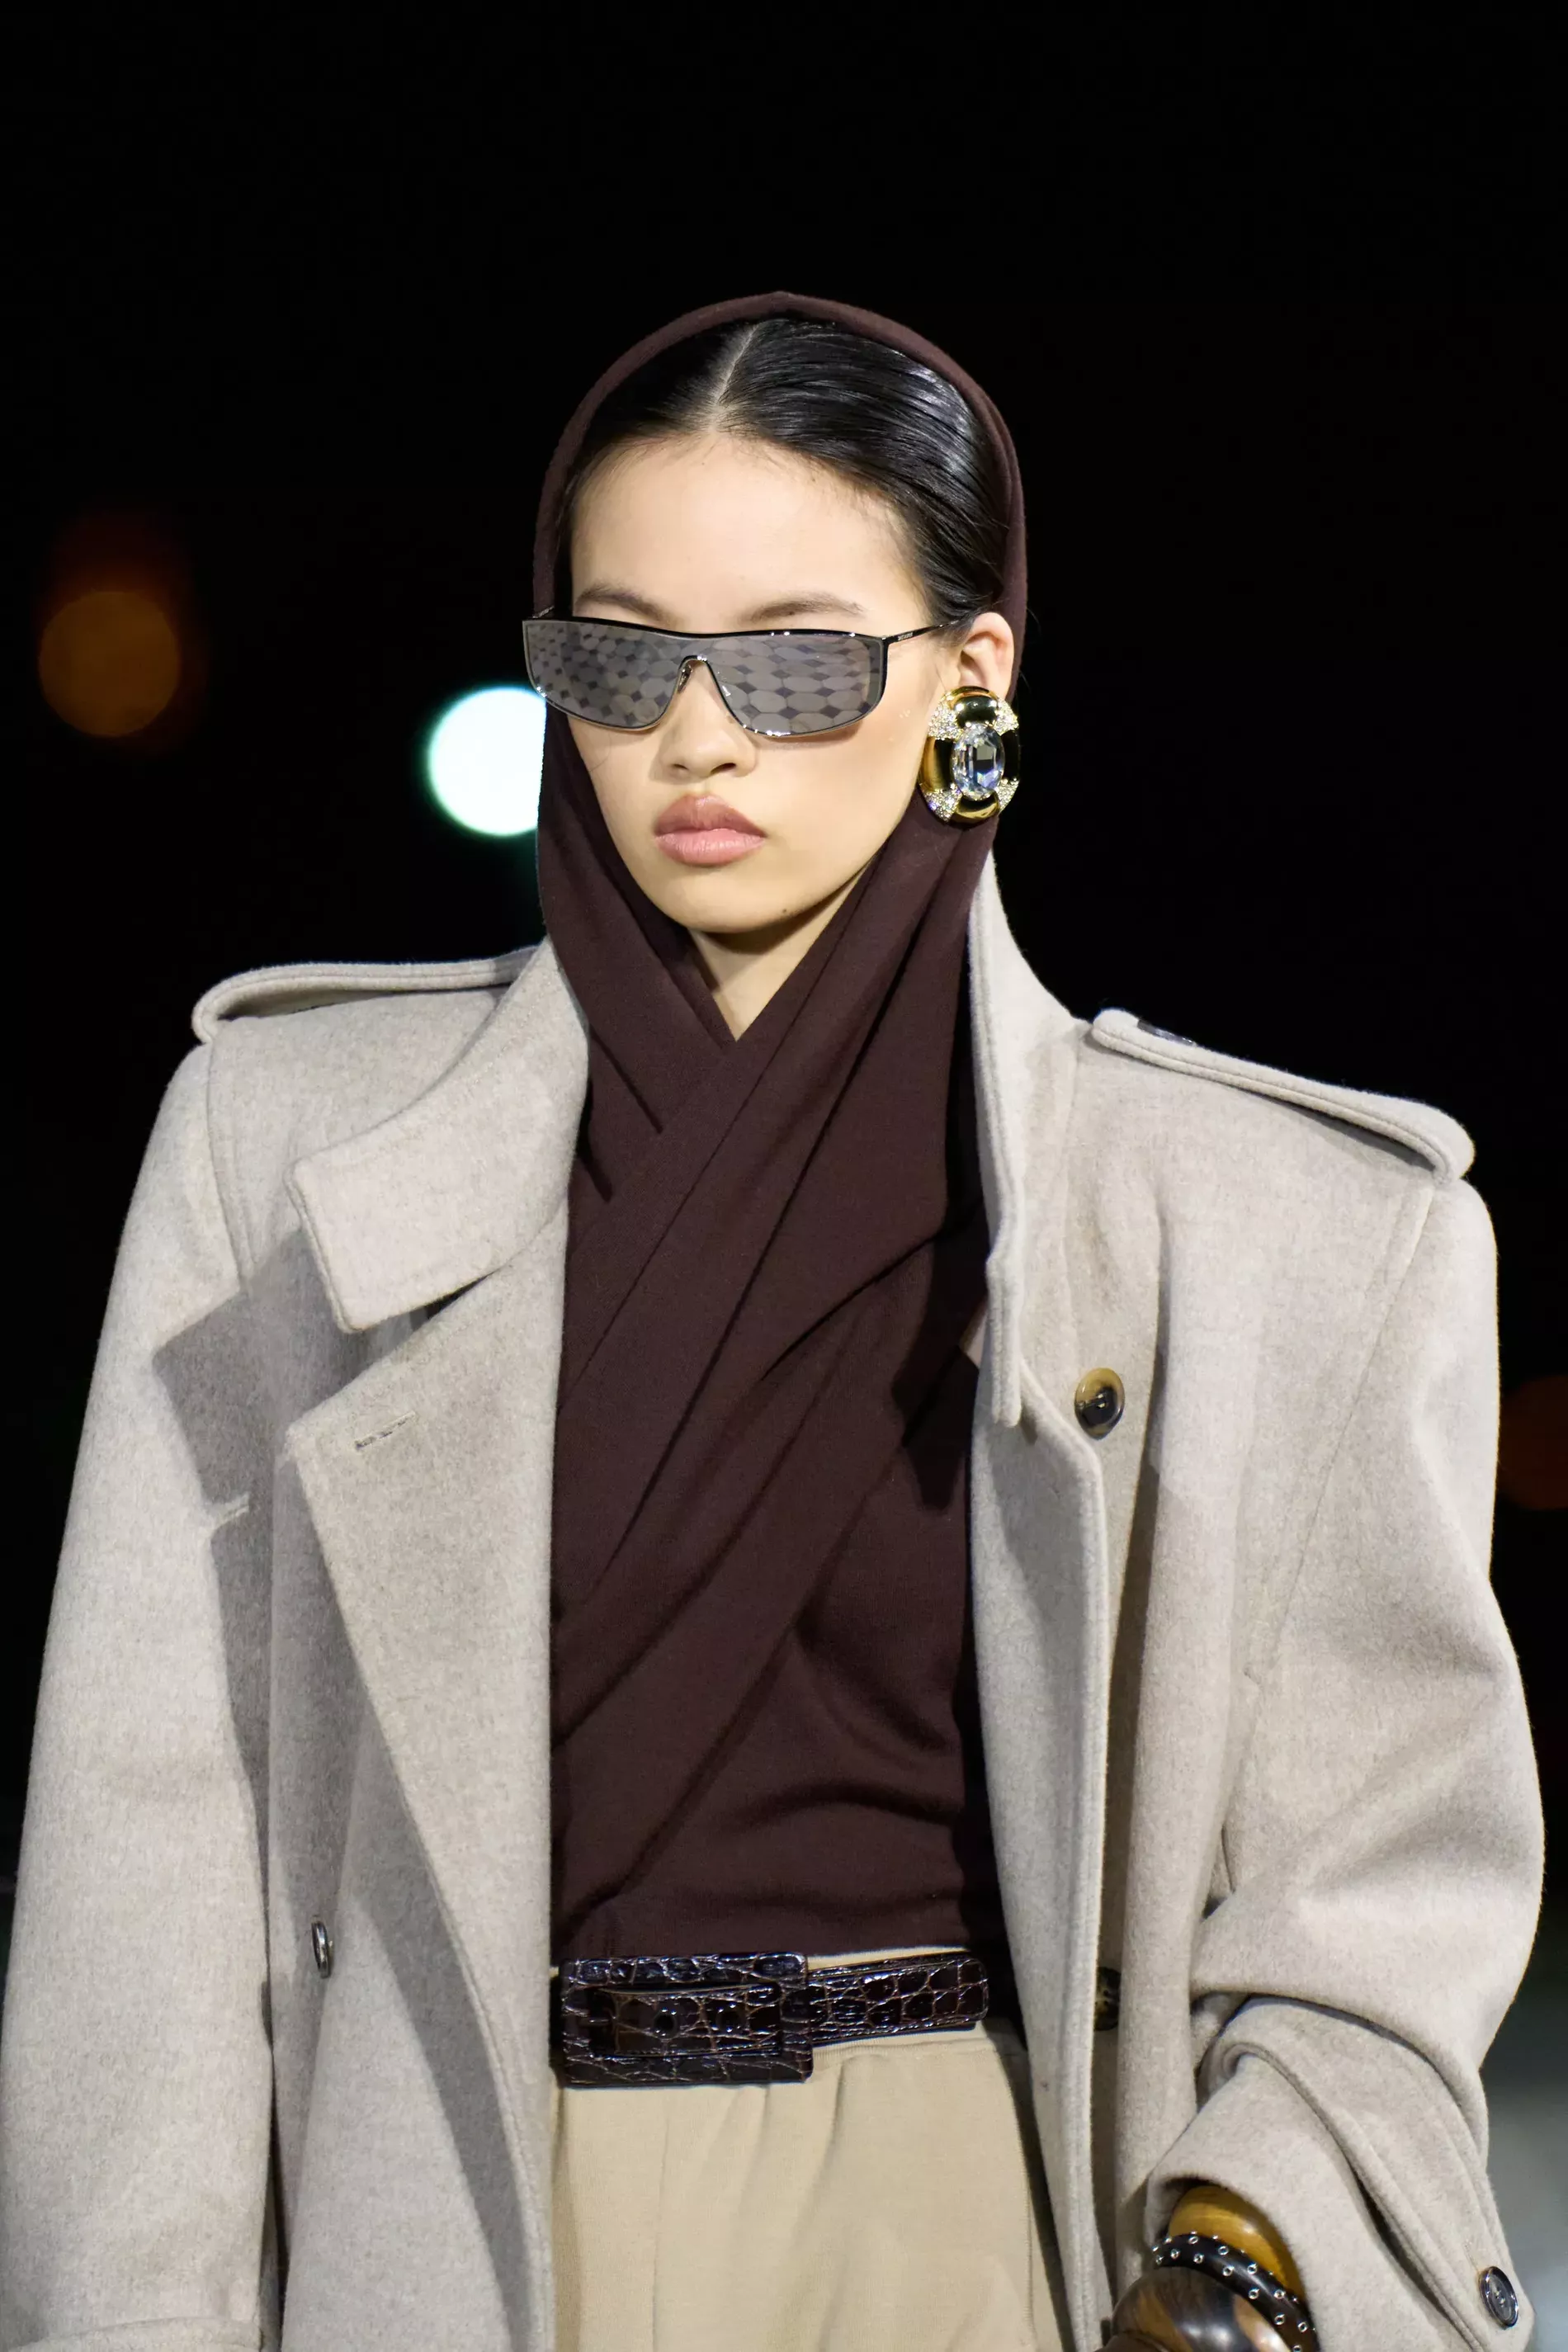 Saint Laurent spring-summer 2023 eyewear collection connects